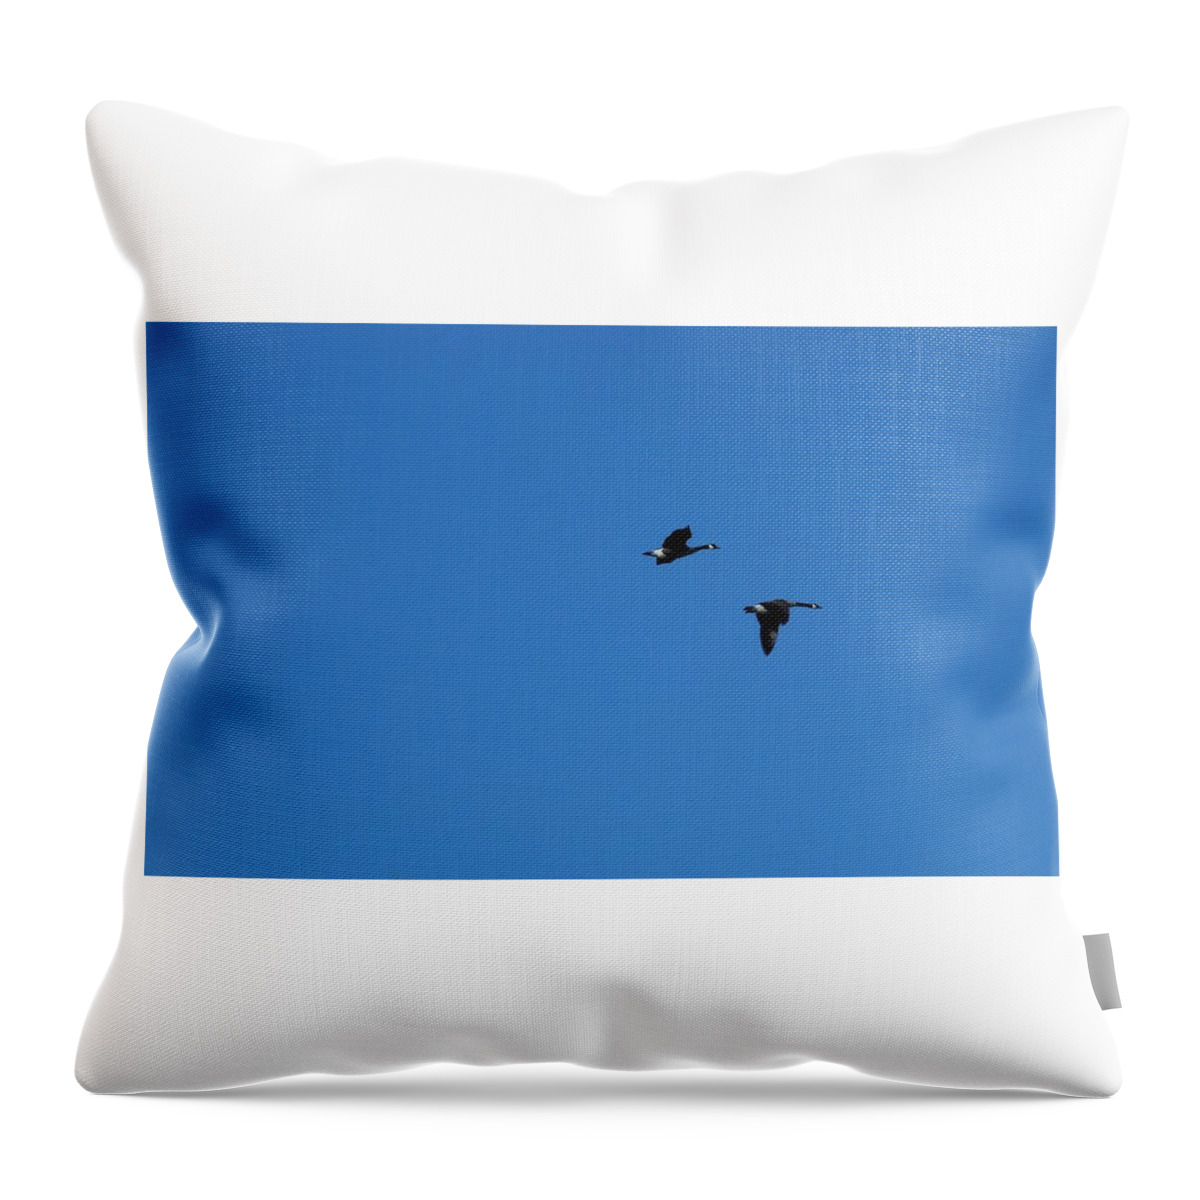 Birds Throw Pillow featuring the photograph Geese In Flight by Ee Photography